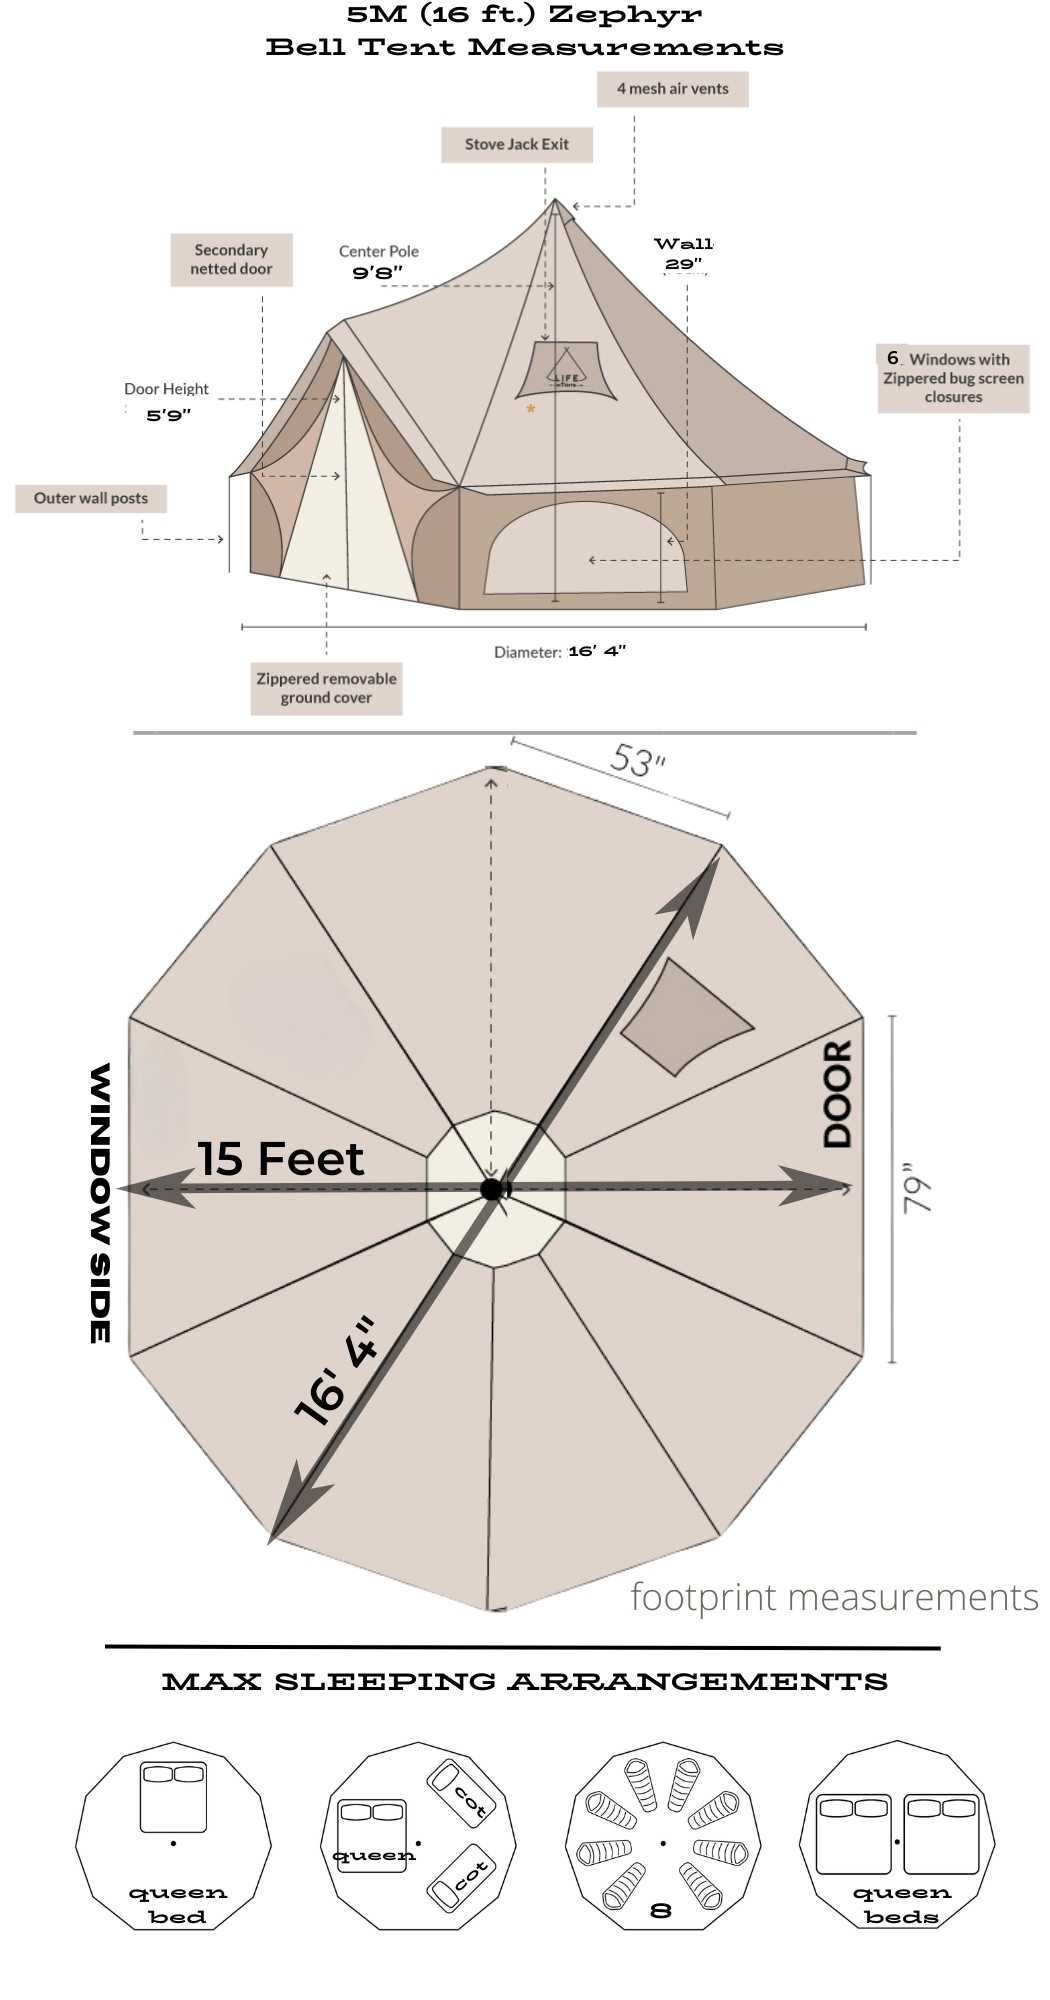 specs for 16 bell tent